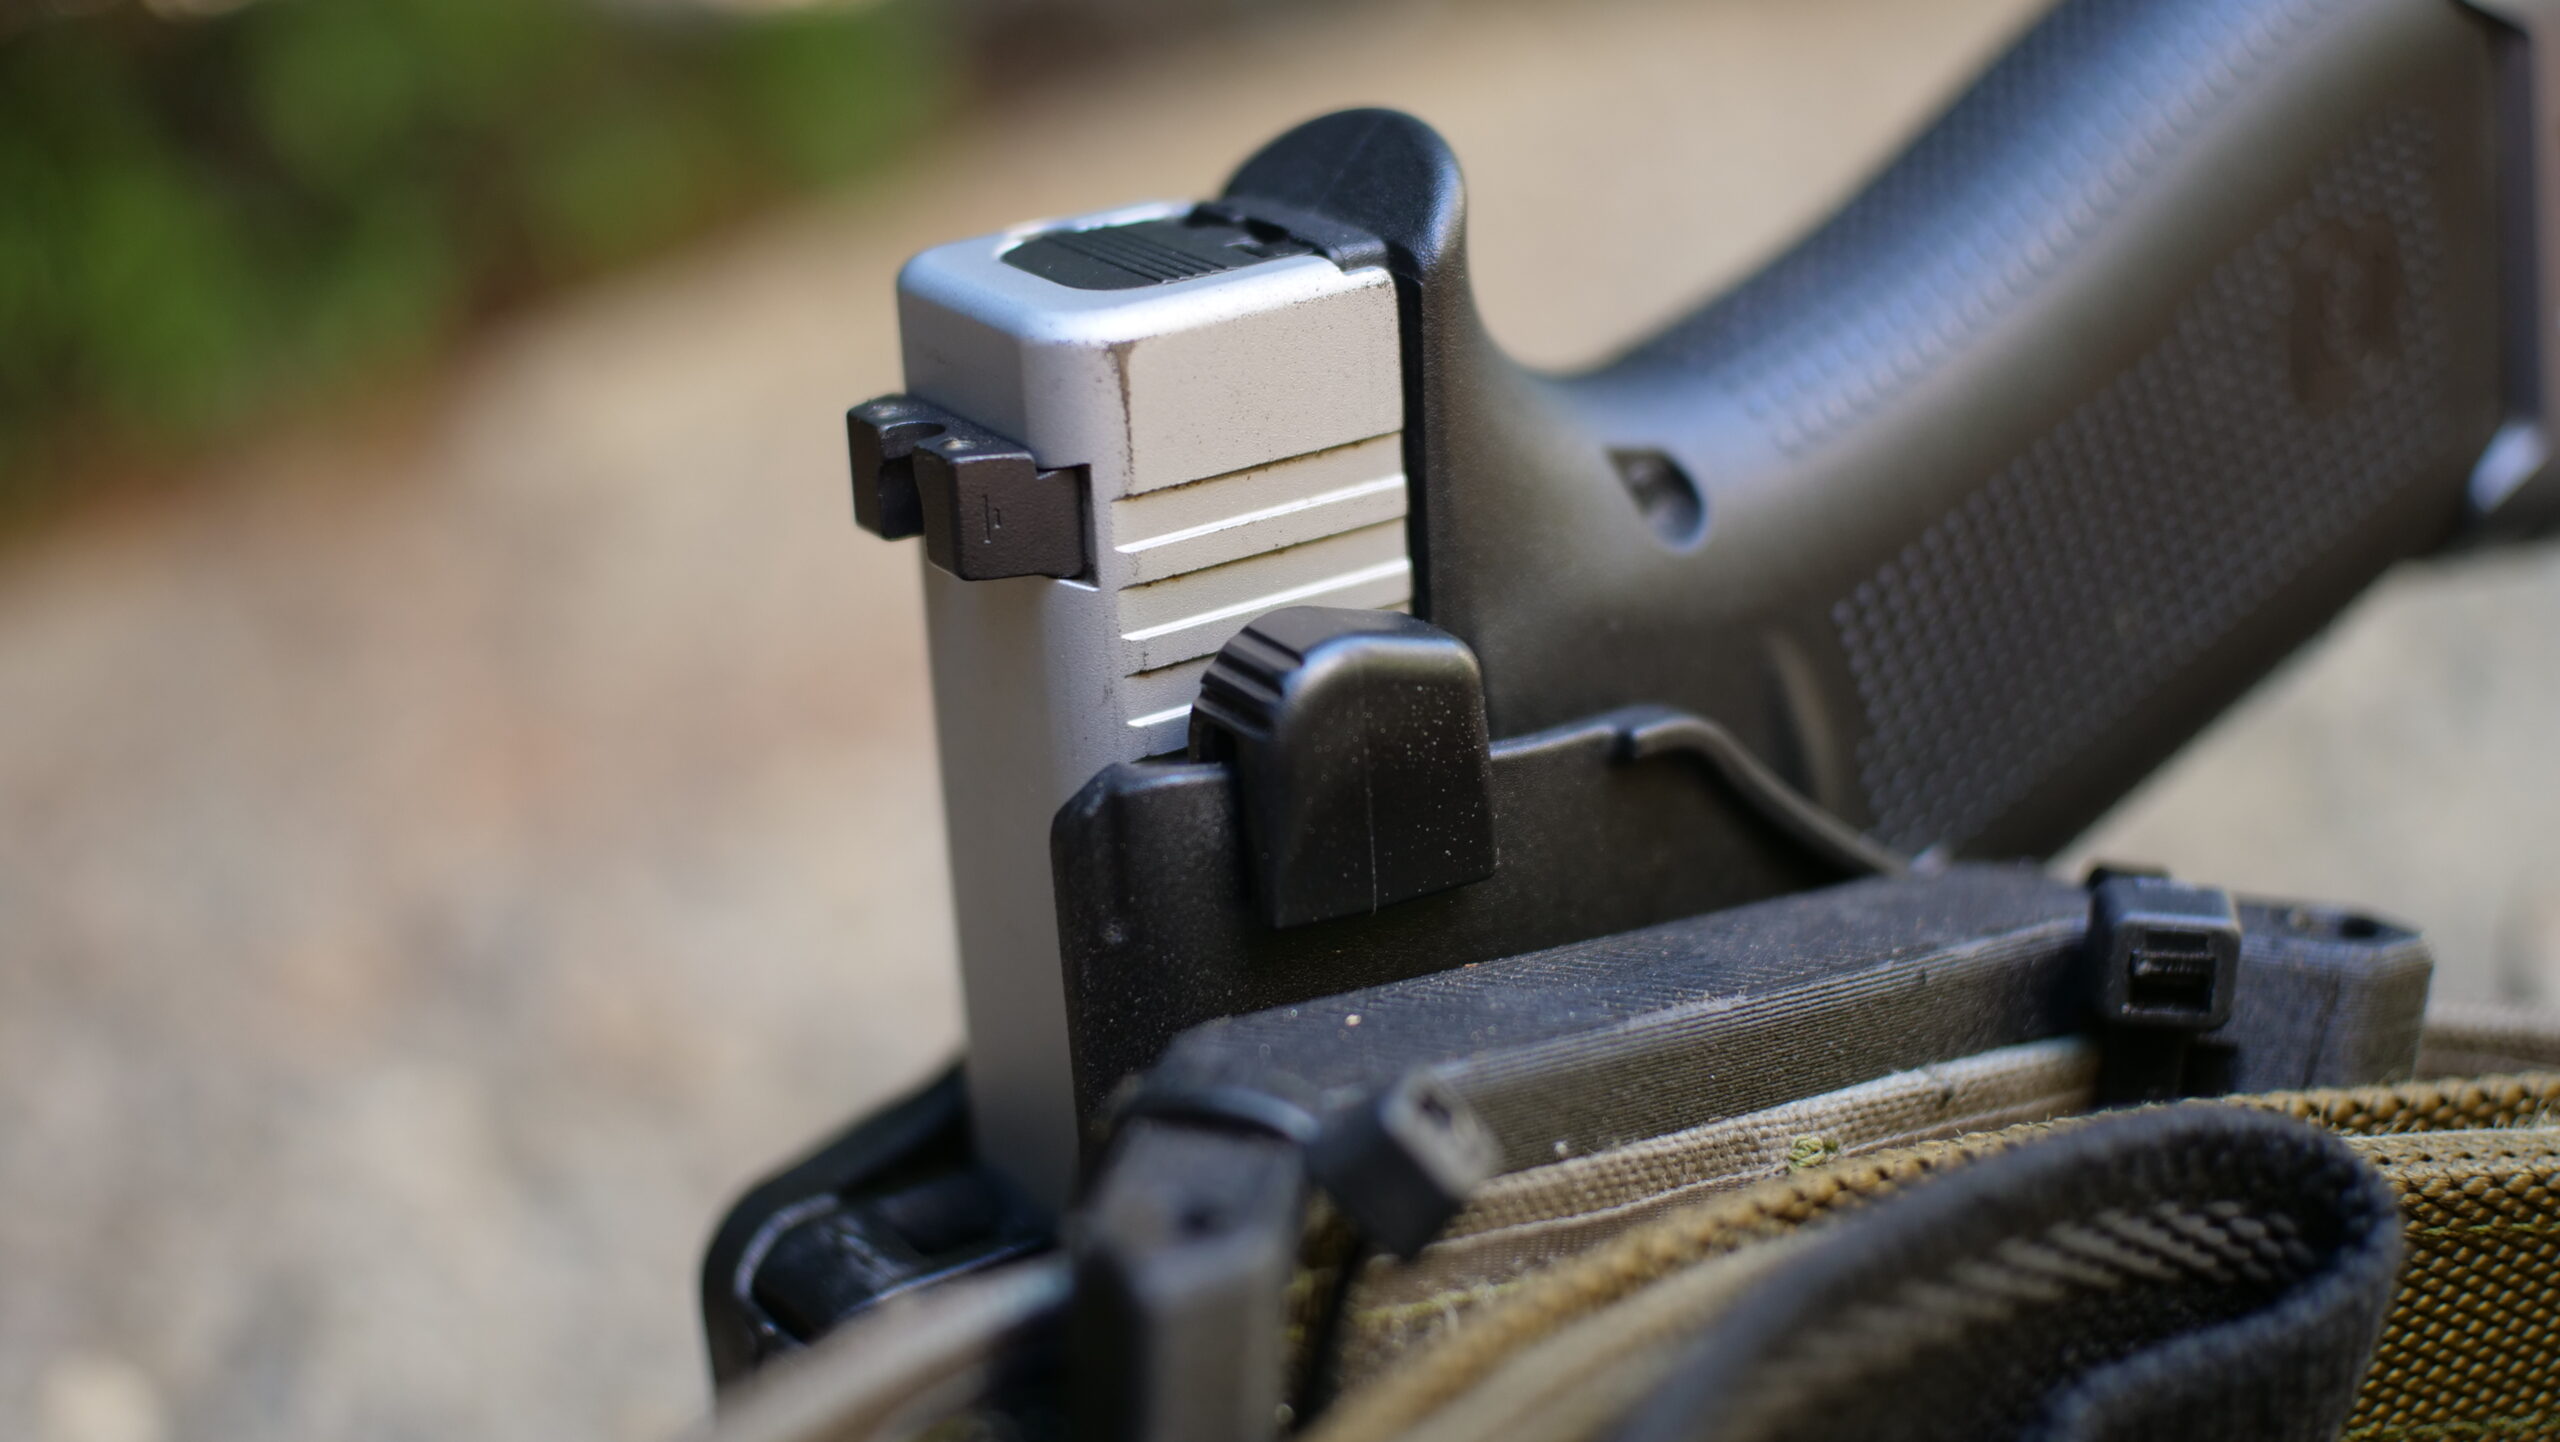 Meet the New Adaptable Solis OWB Concealment Holster from Safariland